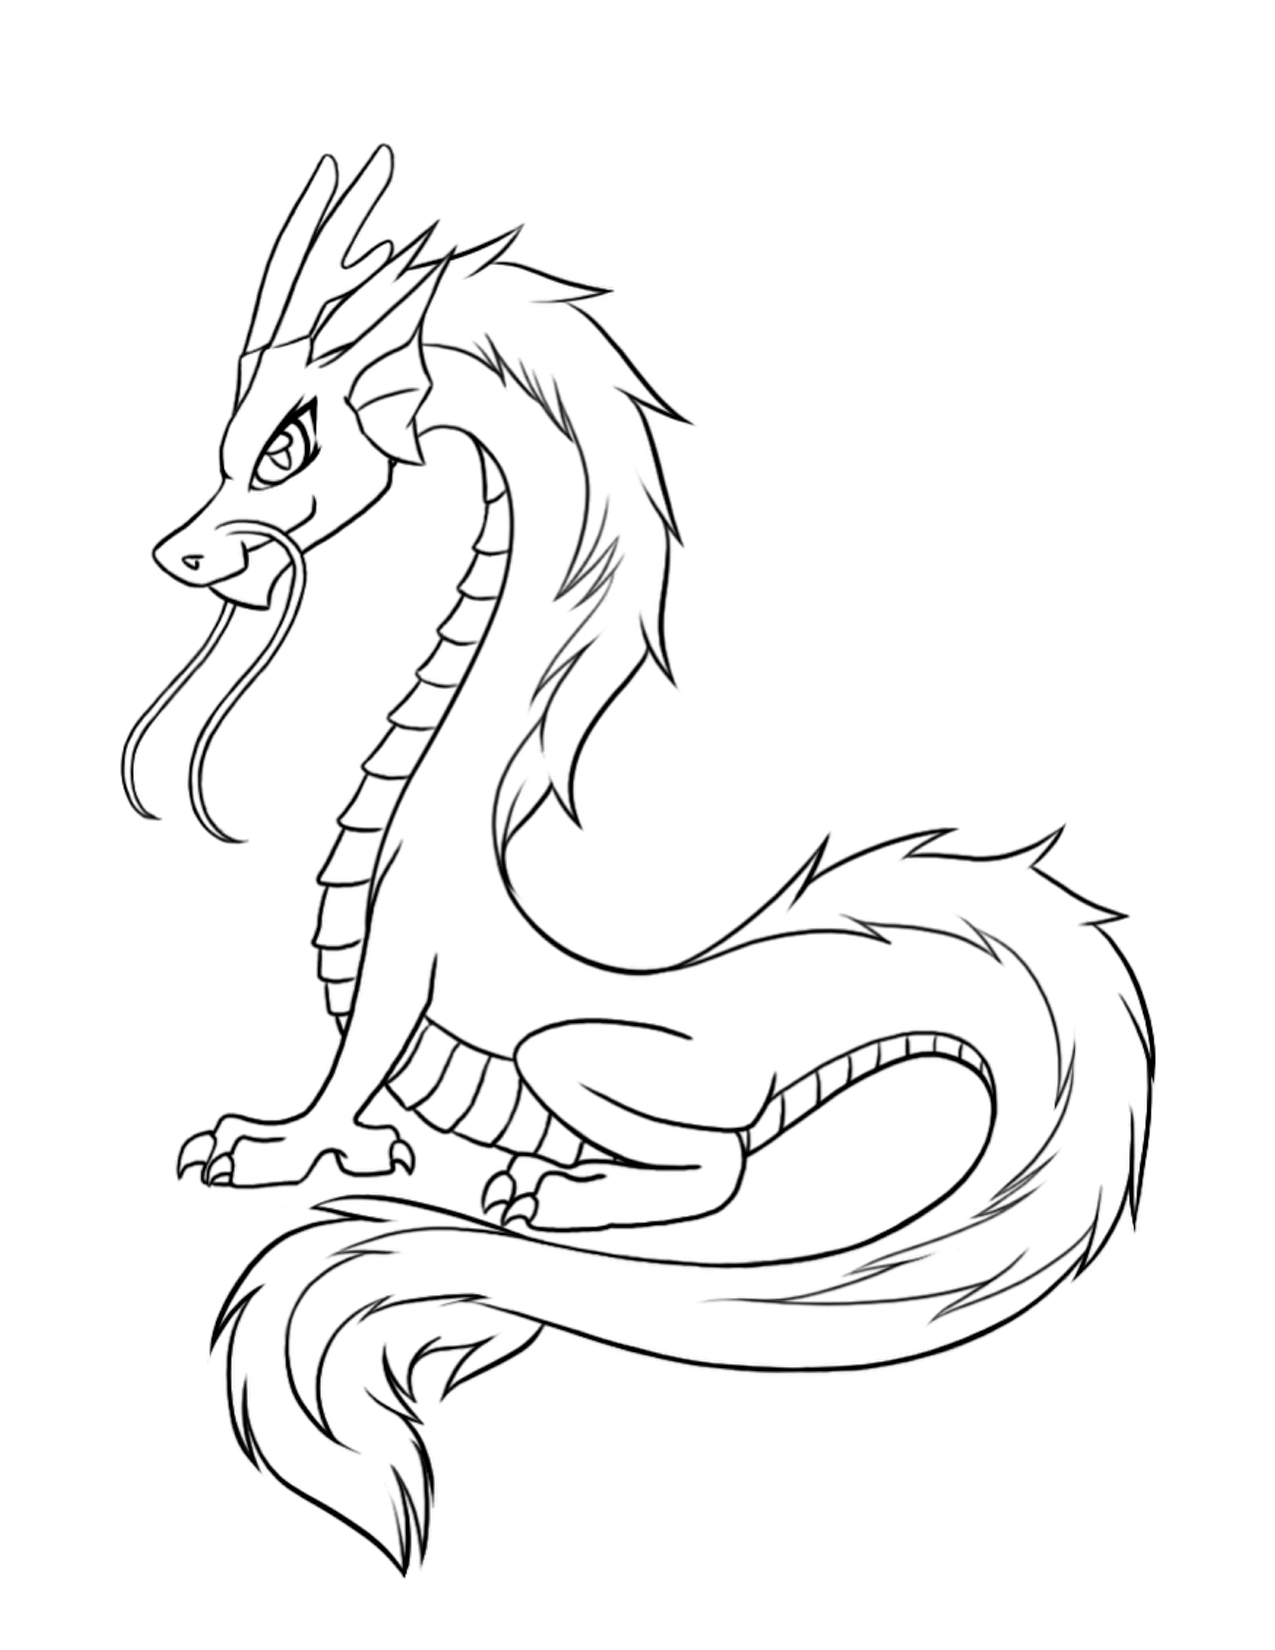 Free printable dragon coloring pages for kids dragon coloring page dragon pictures easy dragon drawings